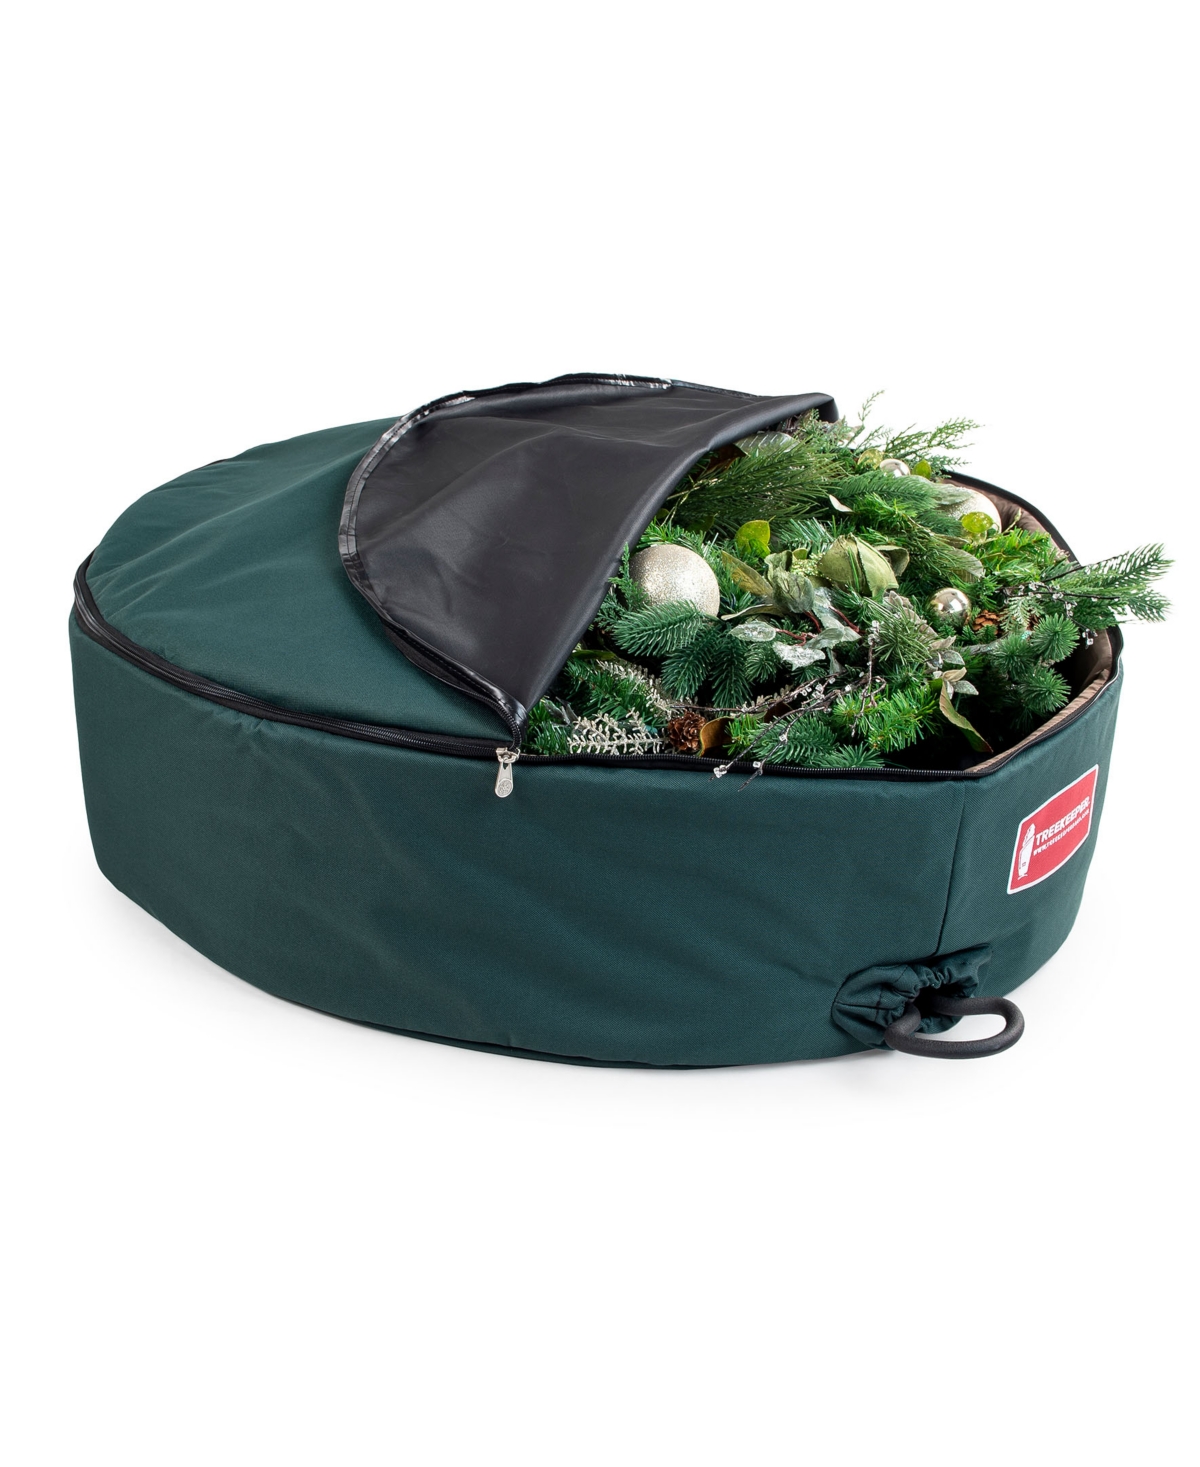 36" Padded Christmas Wreath Storage Container - Green